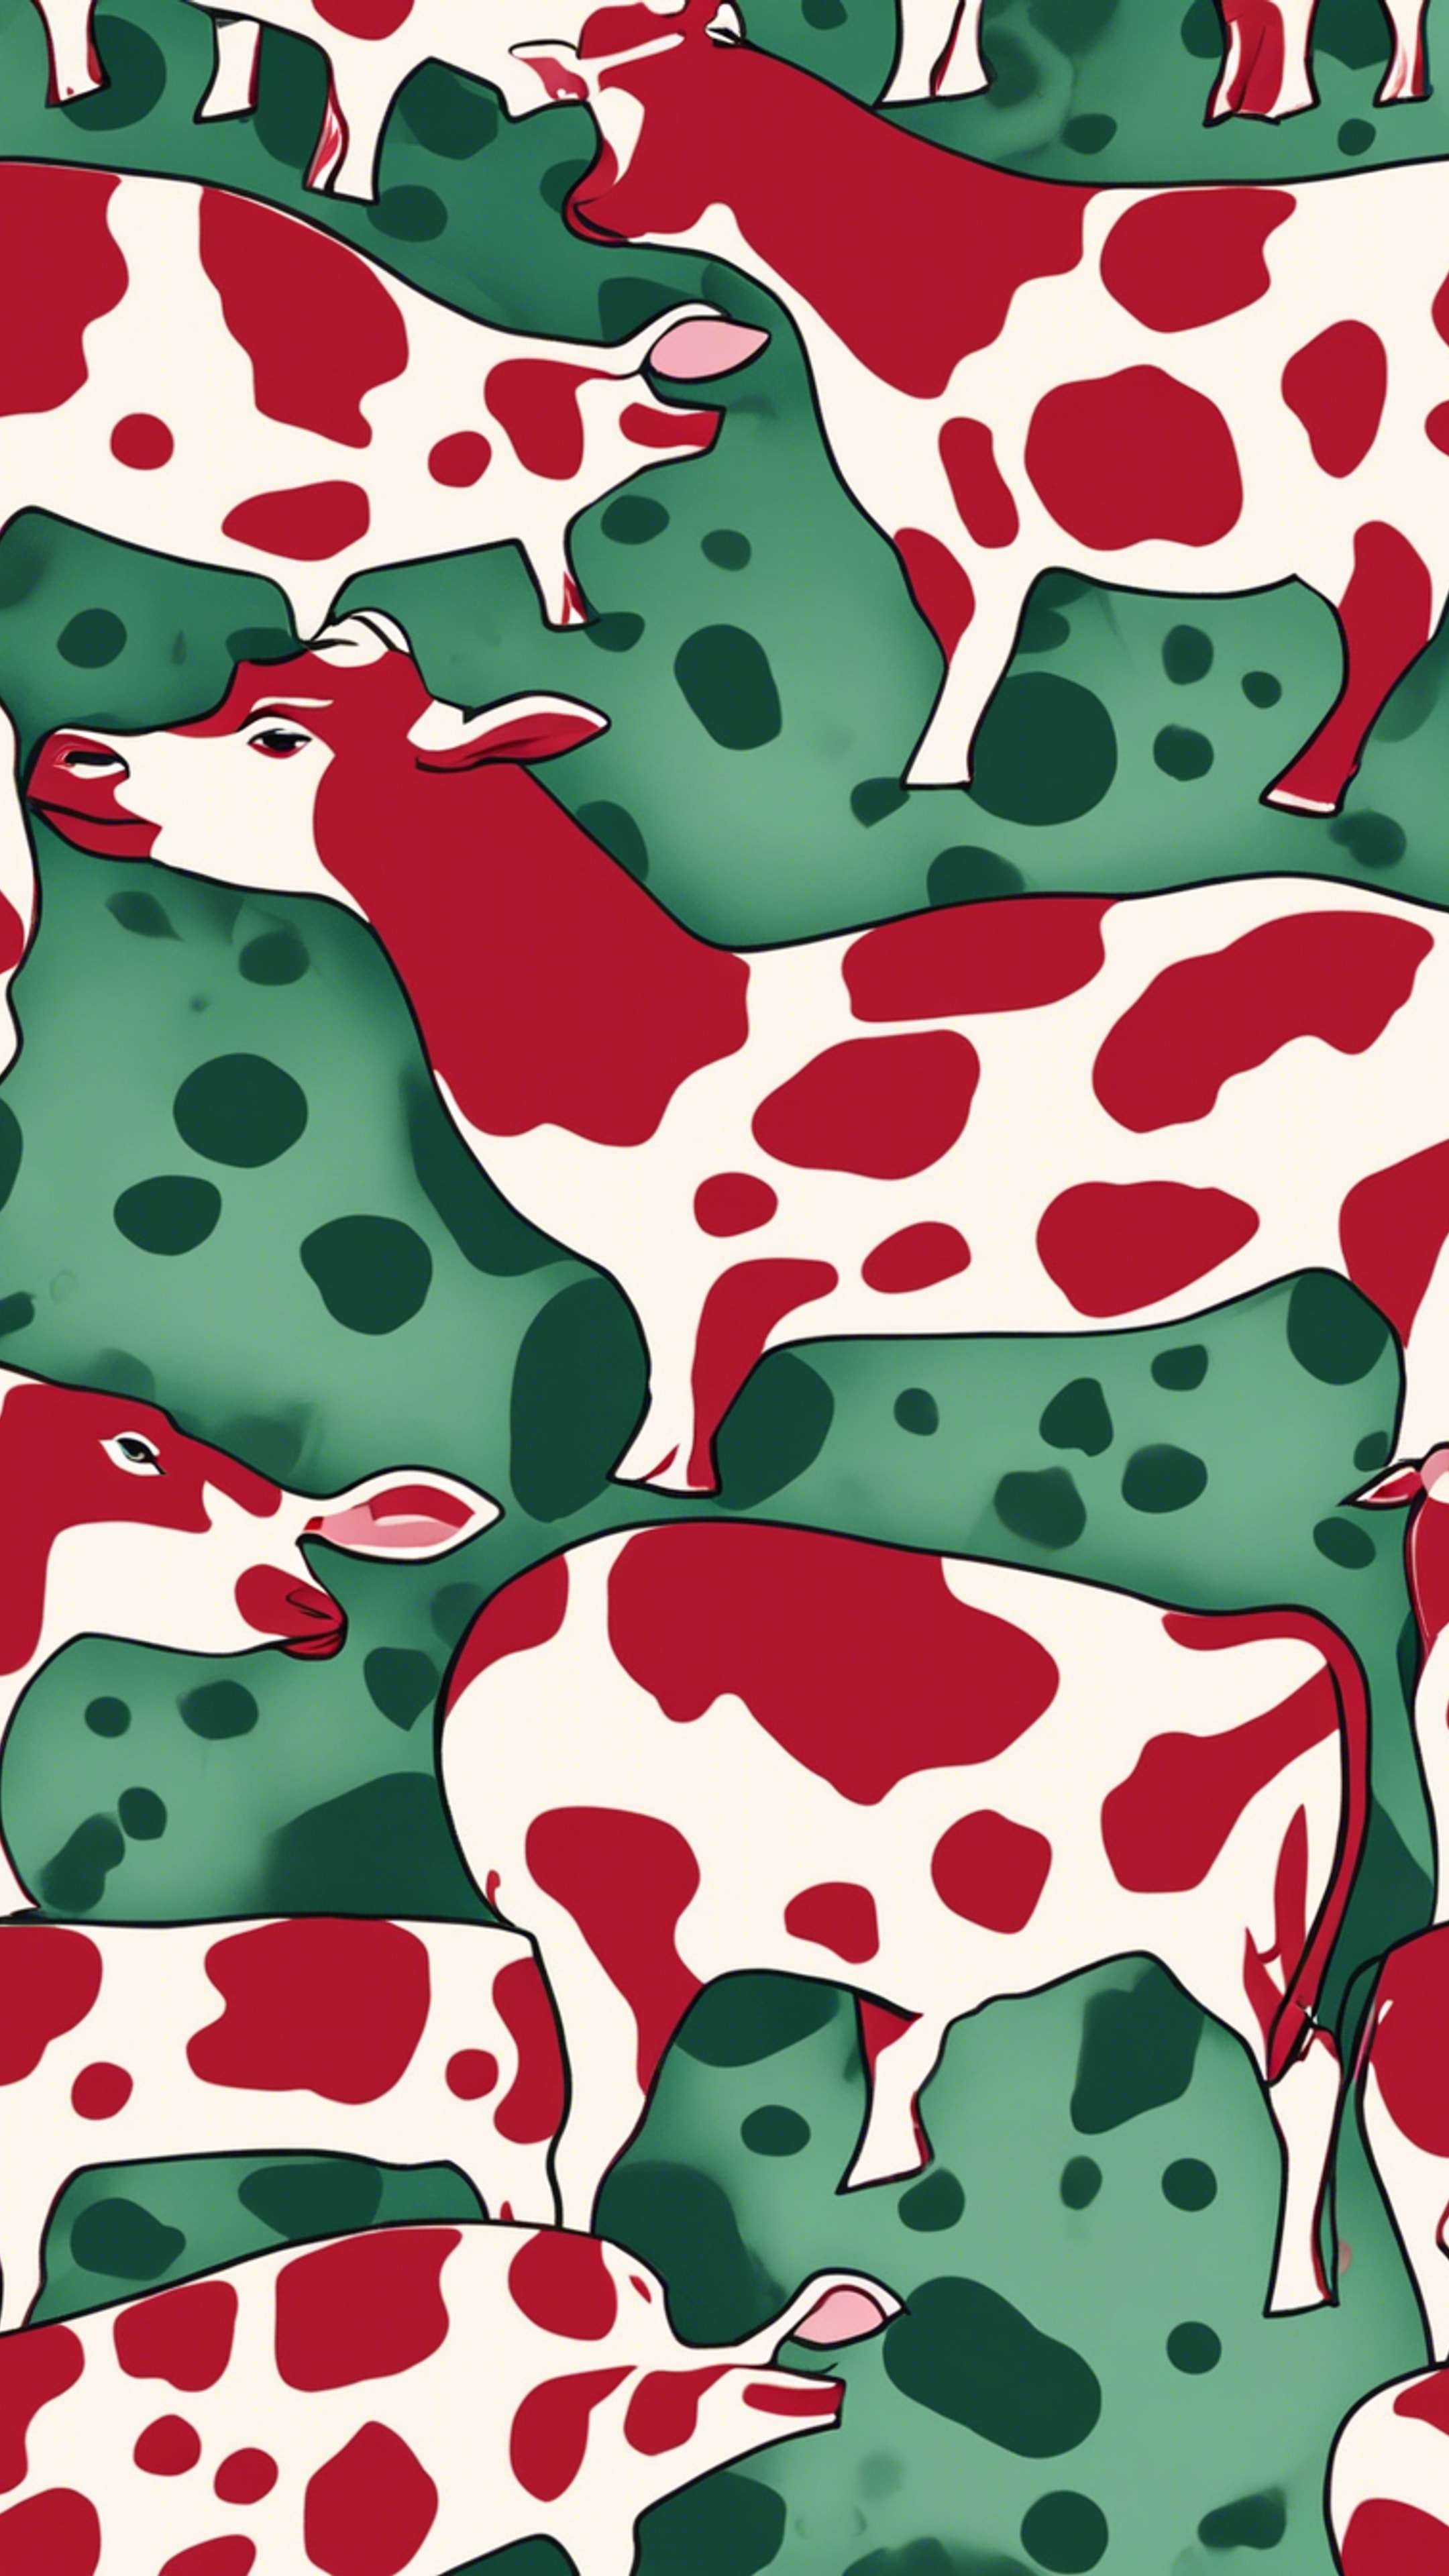 A dynamic, textured pattern of red and green cow spots. Papel de parede[159333102a774de6a0e2]